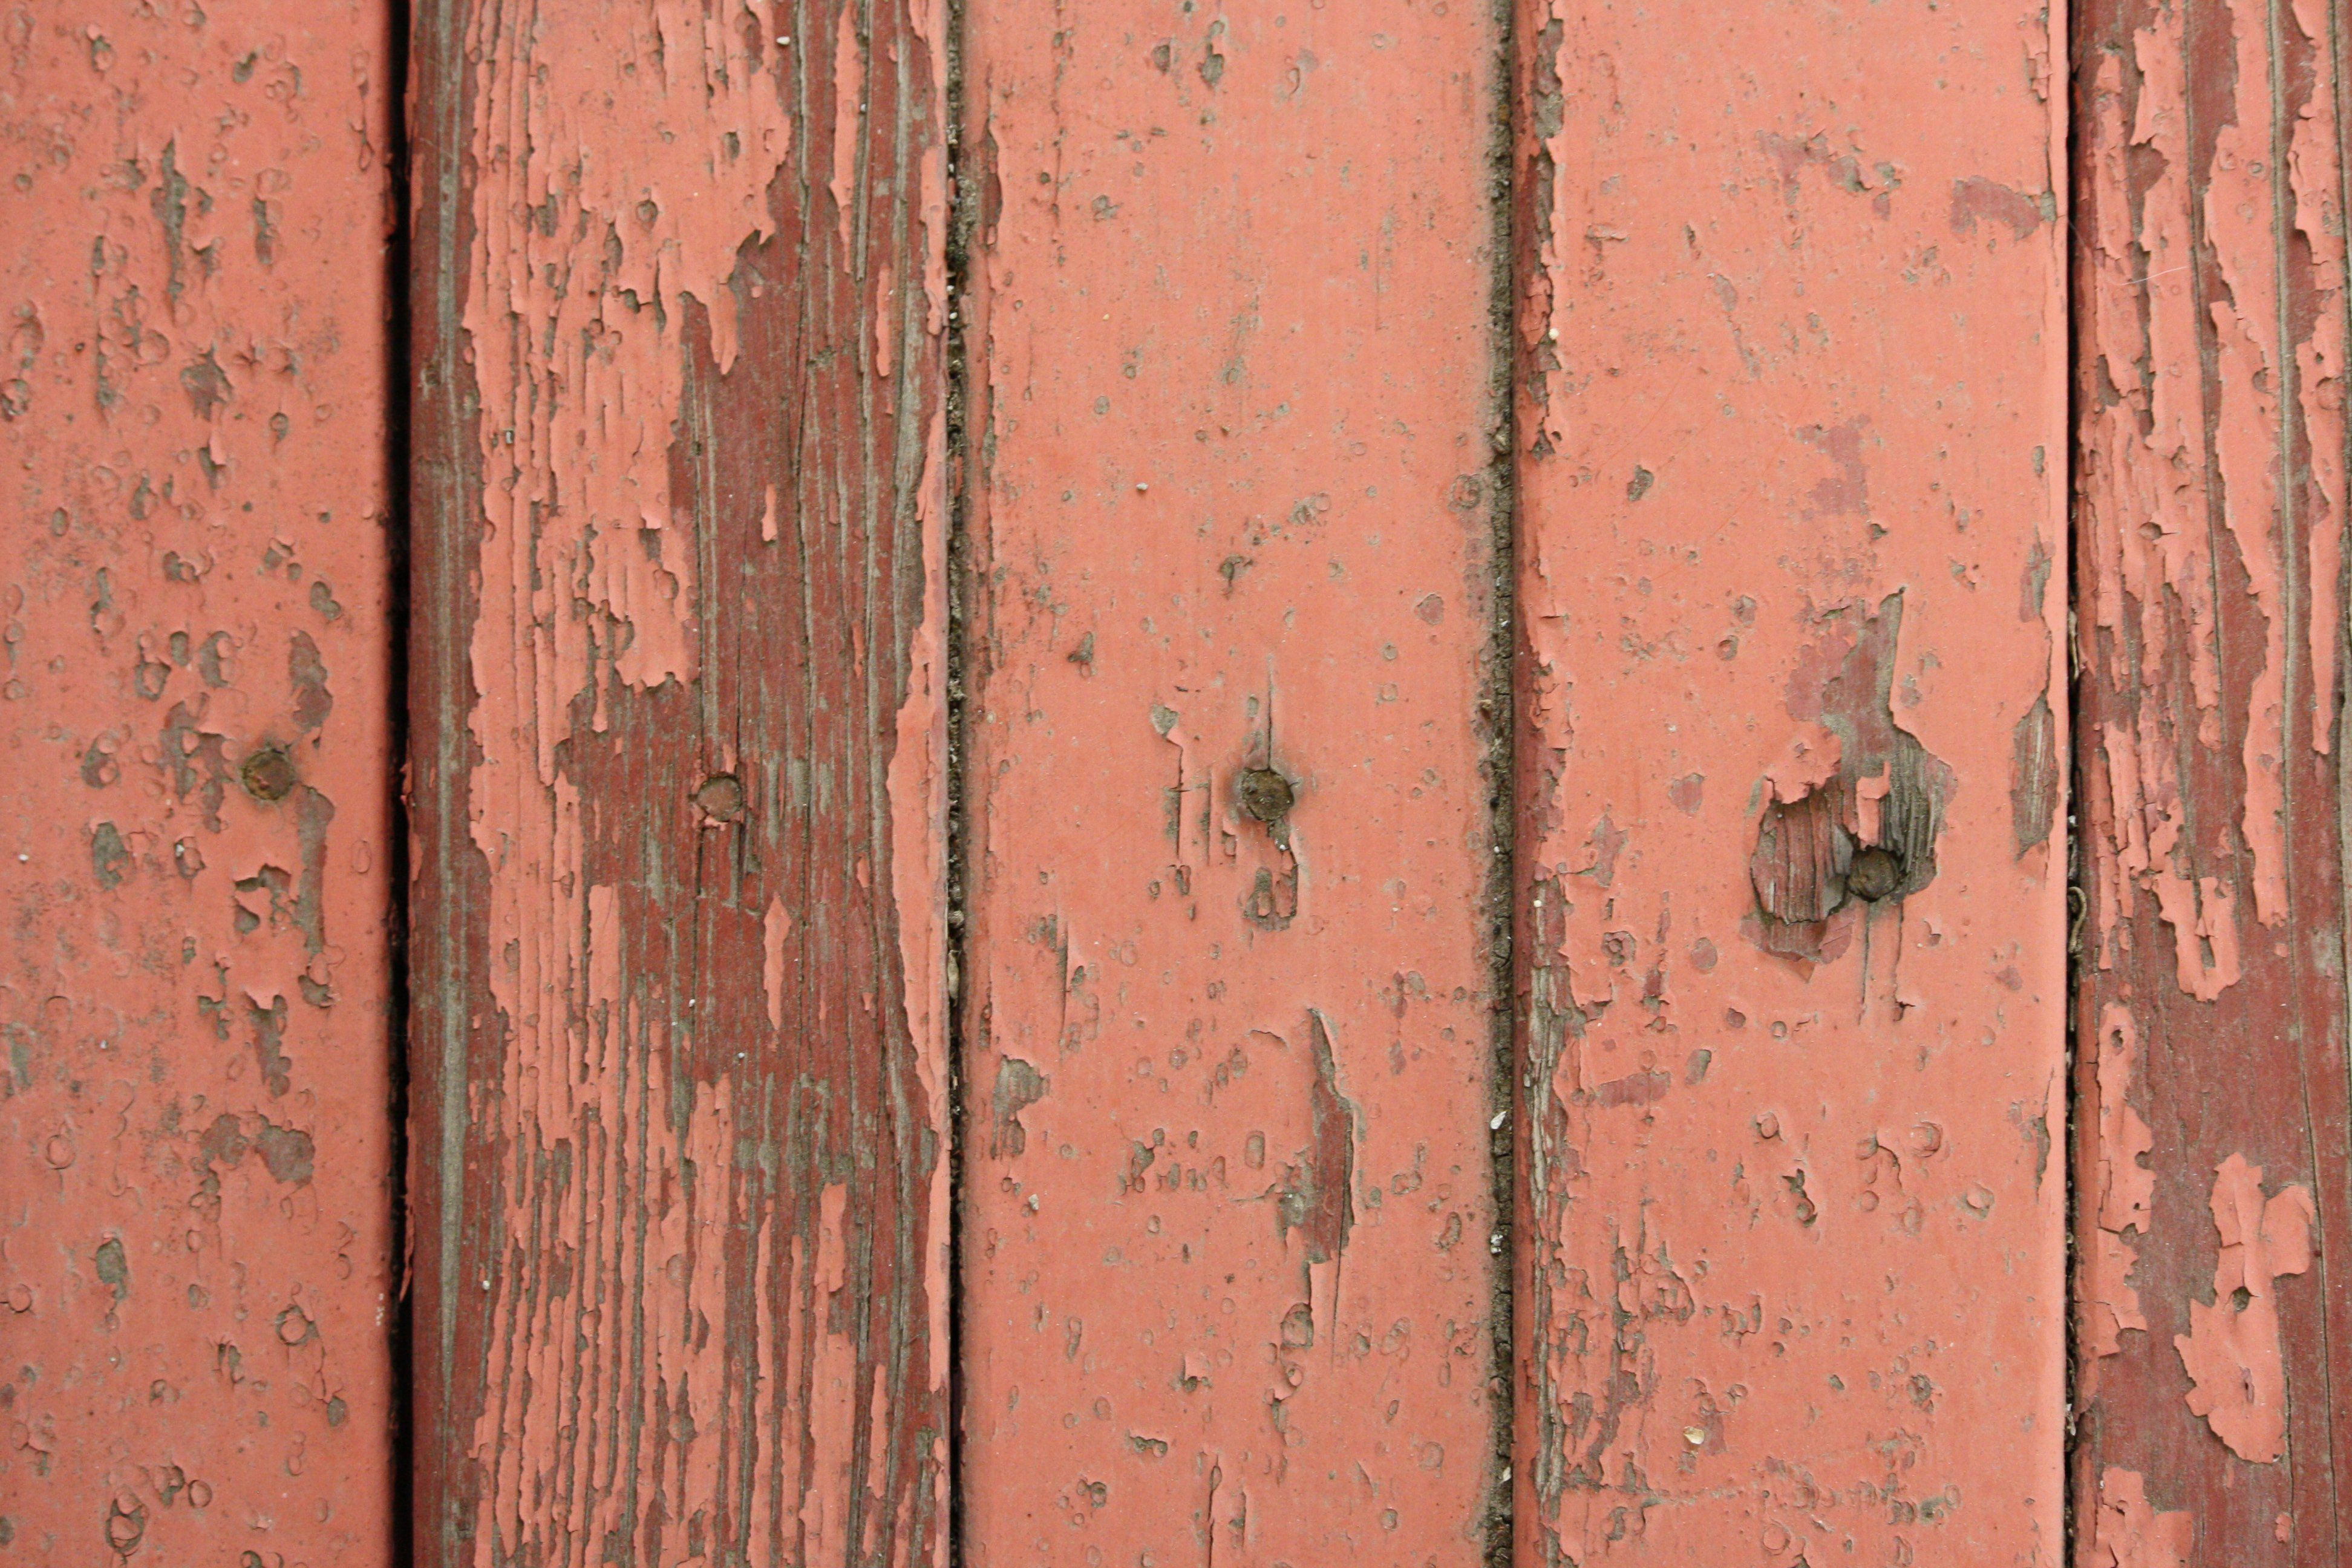 Peeling Red Paint on Old Wooden Boards Texture - Free High ...